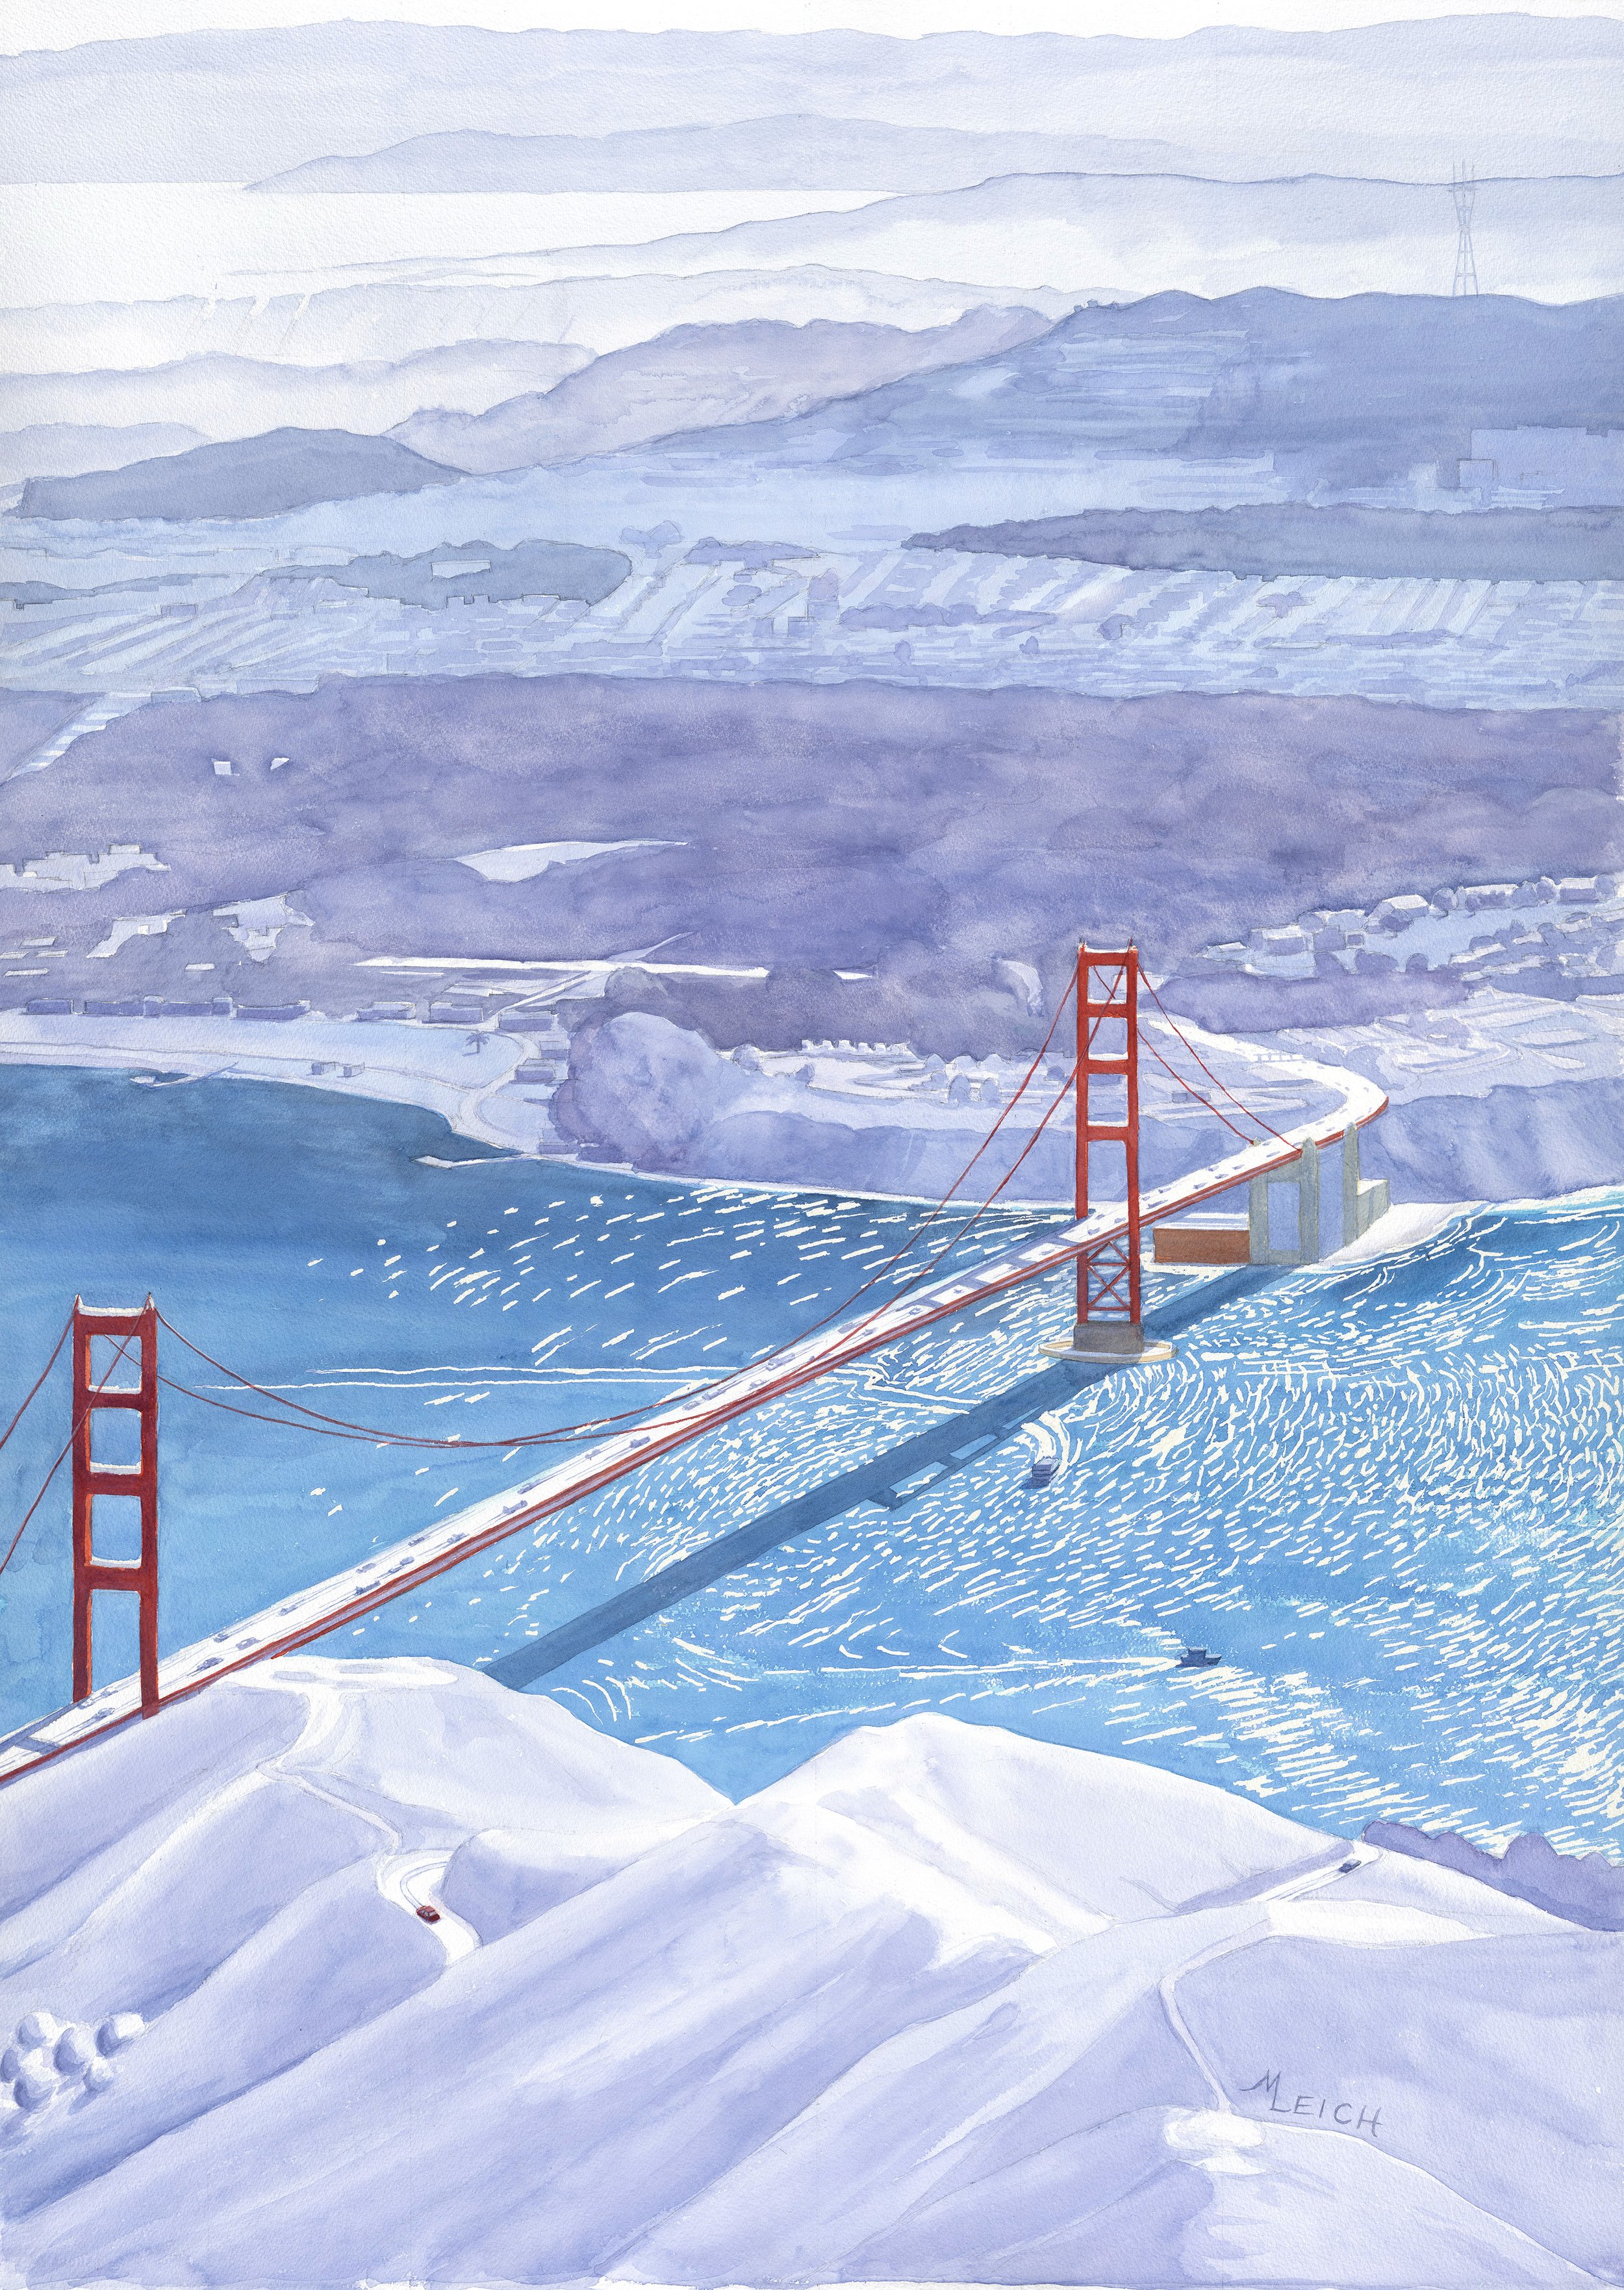 <i>San Francisco in the Snow: Golden Gate"</i>, 29 x 41", watercolor on paper, 2022